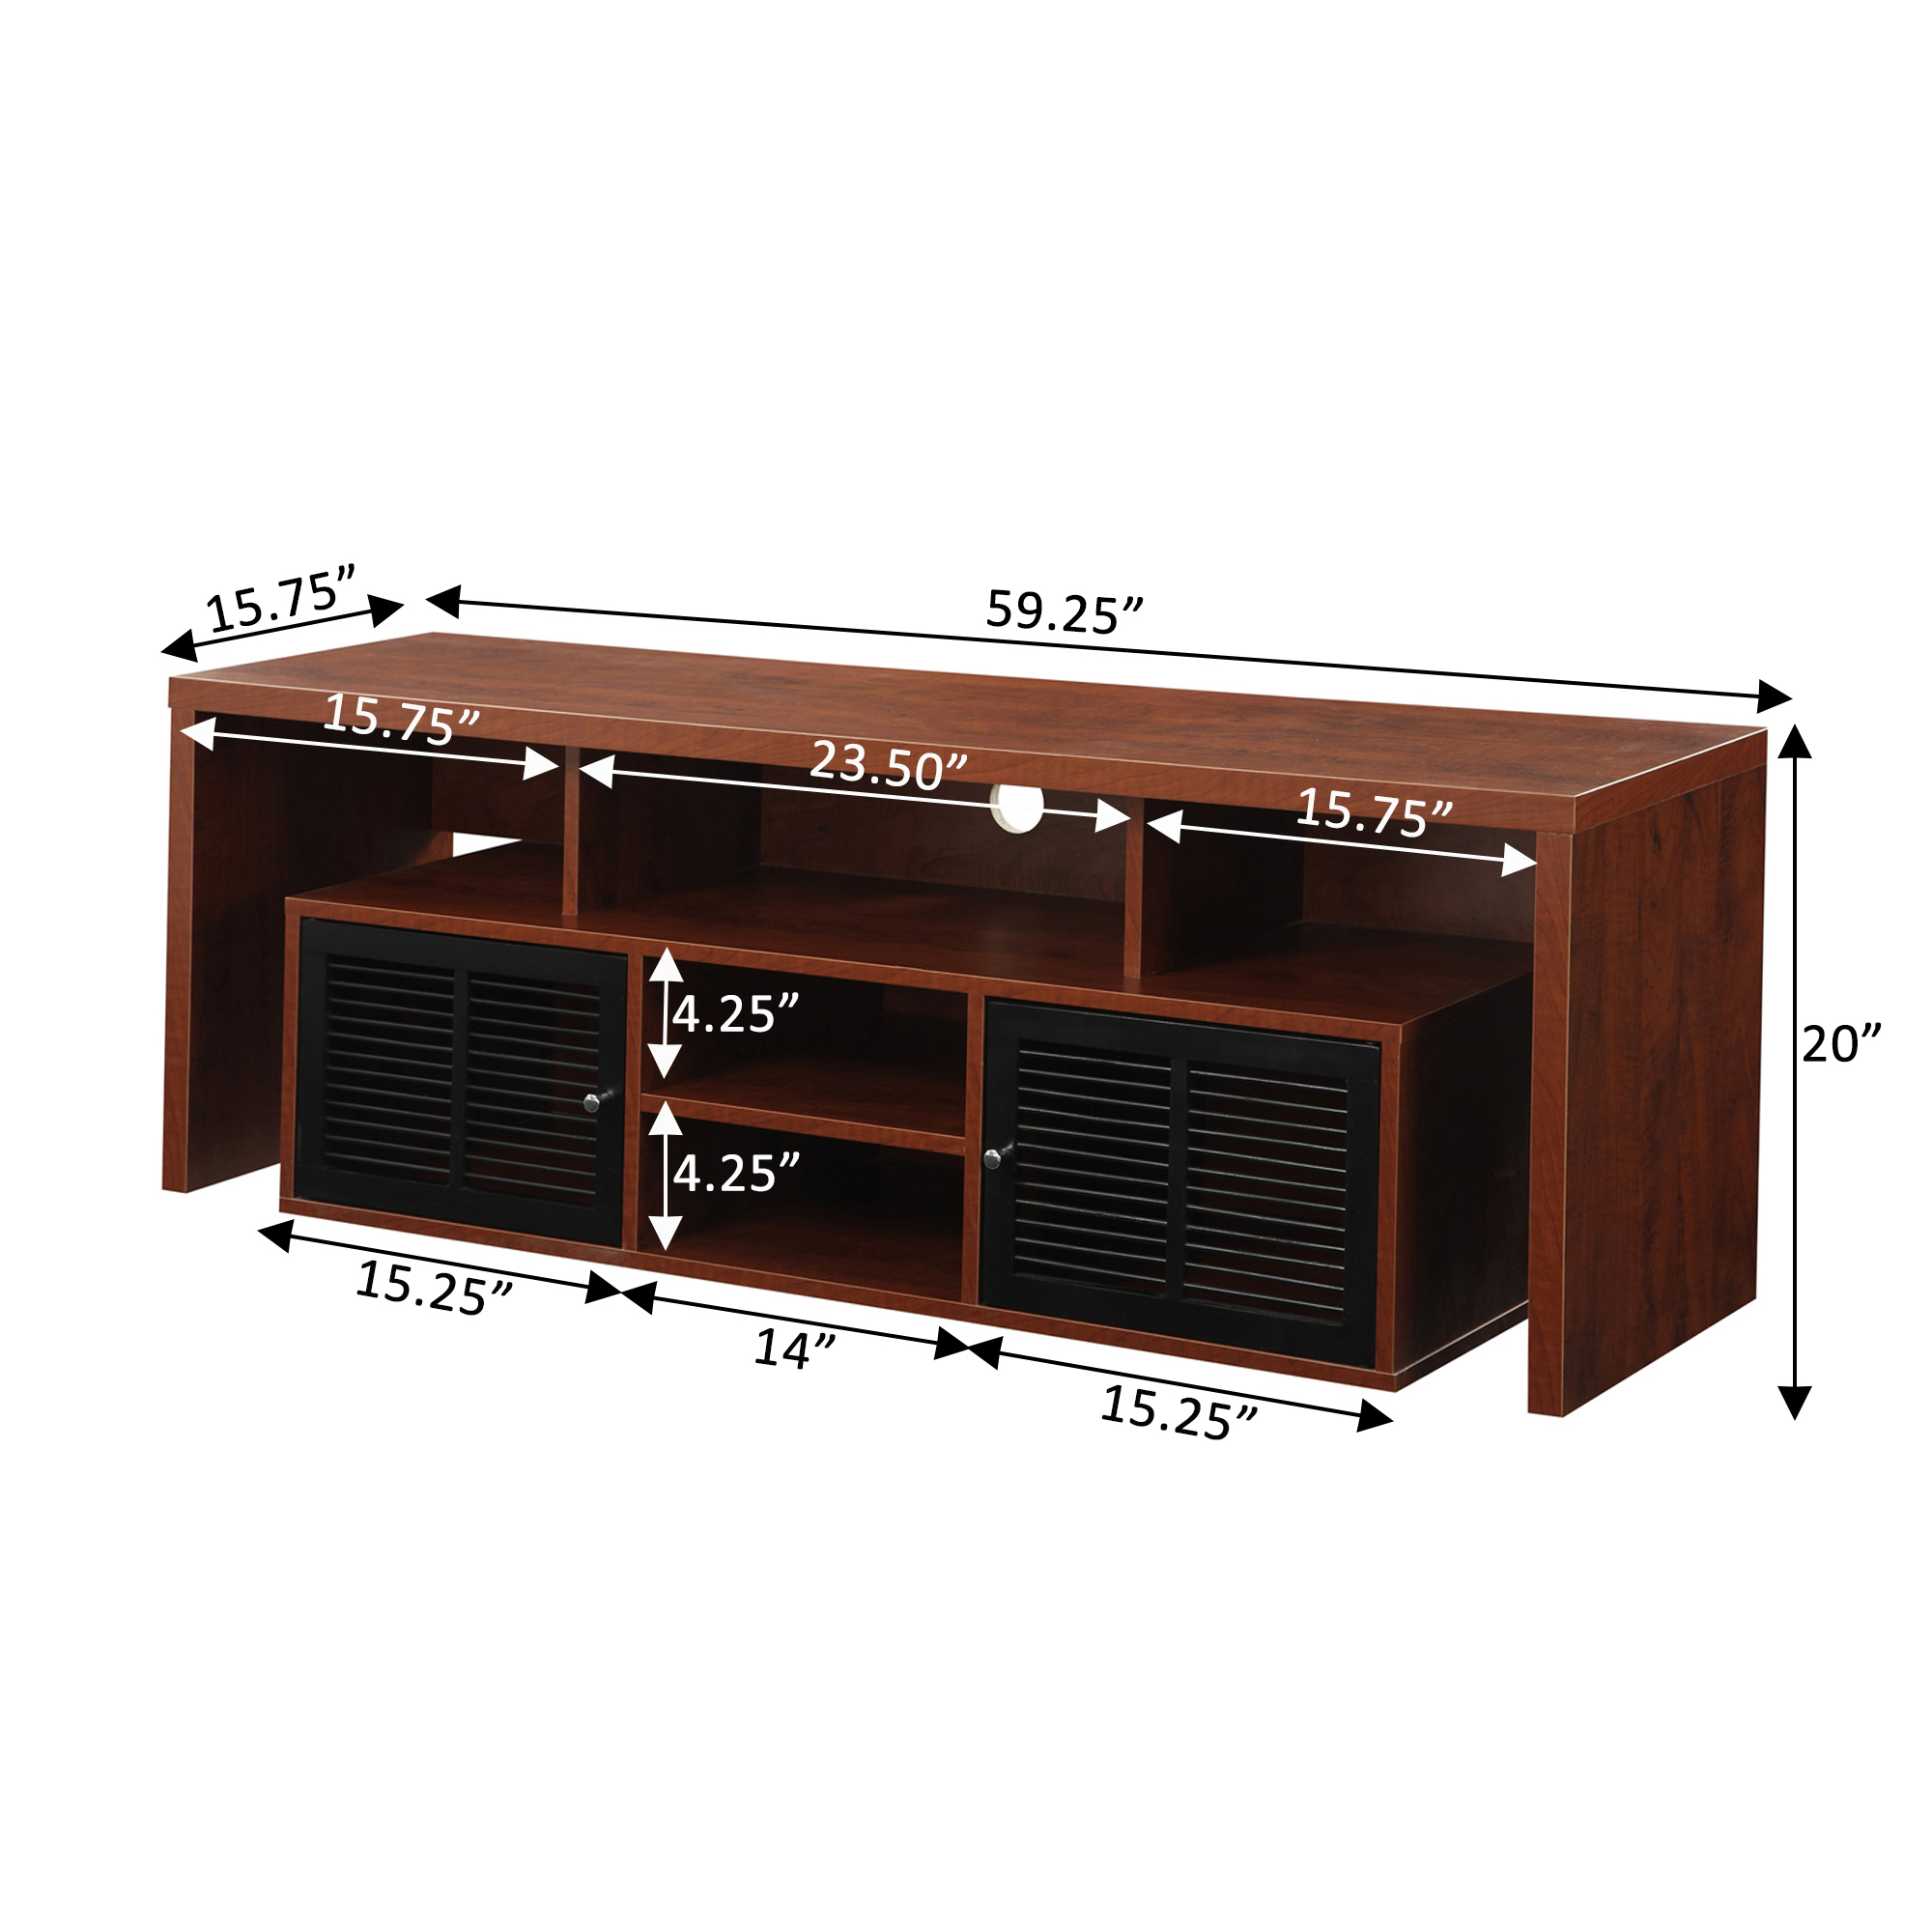 Convenience Concepts Lexington 65 inch TV Stand with Storage Cabinets and Shelves, Cherry - image 4 of 4